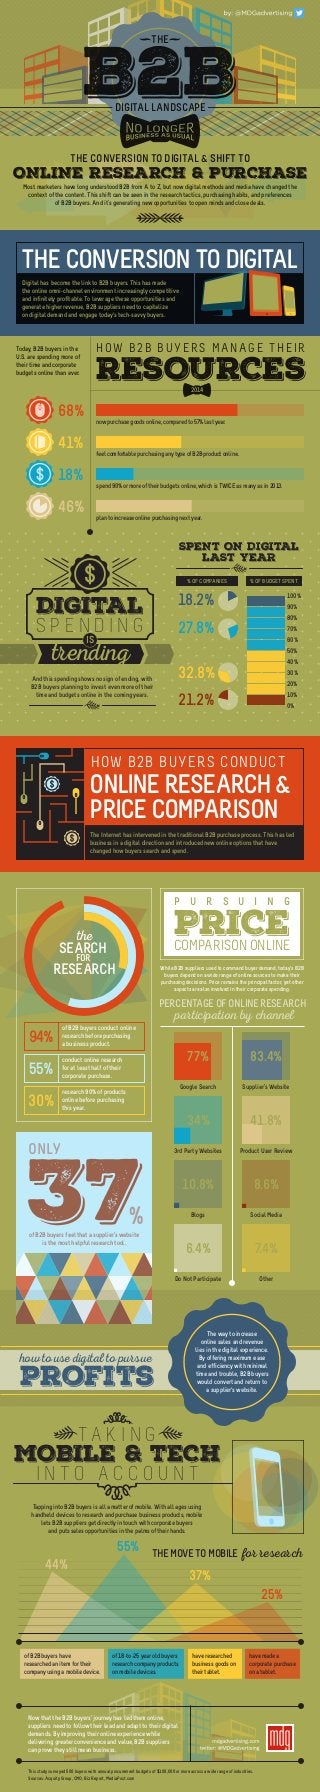 THE
68%
41%
18%
46%
now purchase goods online, compared to 57% last year.
feel comfortable purchasing any type of B2B product online.
spend 90% or more of their budgets online, which is TWICE as many as in 2013.
plan to increase online purchasing next year.
PERCENTAGEOFONLINERESEARCH
participation by channel
Blogs Social Media
Do Not Participate Other
Google Search Supplier’s Website
3rd Party Websites Product User Review
77% 83.4%
34% 41.8%
10.8% 8.6%
6.4% 7.4%
of B2B buyers conduct online
research before purchasing
a business product.
94%
DIGITAL LANDSCAPE
HOW B2B BUYERS MANAGE THEIR
RESOURCES
Today, B2B buyers in the
U.S. are spending more of
their time and corporate
budgets online than ever.
THECONVERSIONTODIGITAL
Digital has become the link to B2B buyers. This has made
the online omni-channel environment increasingly competitive
and infinitely profitable. To leverage these opportunities and
generate higher revenue, B2B suppliers need to capitalize
on digital demand and engage today's tech-savvy buyers.
While B2B suppliers used to command buyer demand, today's B2B
buyers depend on a wide range of online sources to make their
purchasing decisions. Price remains the principal factor, yet other
aspects are also involved in their corporate spending.
44%
55%
37%
25%
of B2B buyers have
researched an item for their
company using a mobile device.
of 18-to-25 year old buyers
research company products
on mobile devices.
have researched
business goods on
their tablet.
have made a
corporate purchase
on a tablet.
THEMOVETOMOBILE for research
P U R S U I N G
PRICECOMPARISON ONLINE
This study surveyed 500 buyers with annual procurement budgets of $100,000 or more across a wide range of industries.
Sources: Acquity Group, CMO, Biz Report, MediaPost.com
37of B2B buyers feel that a supplier’s website
is the most helpful research tool.
ONLY
%
T A K I N G
MOBILE & TECH
I N T O A C C O U N T
Most marketers have long understood B2B from A to Z, but now digital methods and media have changed the
context of the content. This shift can be seen in the research tactics, purchasing habits, and preferences
of B2B buyers. And it's generating new opportunities to open minds and close deals.
THE CONVERSION TO DIGITAL & SHIFT TO
ONLINE RESEARCH & PURCHASE
2014
DIGITAL
S P E N D I N G
trending
IS
The Internet has intervened in the traditional B2B purchase process. This has led
business in a digital direction and introduced new online options that have
changed how buyers search and spend.
HOW B2B BUYERS CONDUCT
ONLINERESEARCH&
PRICECOMPARISON
21.2%
32.8%
18.2%
27.8%
SPENT ON DIGITAL
LAST YEAR
10%
20%
30%
40%
50%
60%
70%
80%
90%
100%
0%
% OF BUDGET SPENT% OF COMPANIES
And this spending shows no sign of ending, with
B2B buyers planning to invest even more of their
time and budgets online in the coming years.
the
SEARCH
FOR
RESEARCH
conduct online research
for at least half of their
corporate purchase.
55%
research 90% of products
online before purchasing
this year.
30%
Tapping into B2B buyers is all a matter of mobile. With all ages using
handheld devices to research and purchase business products, mobile
lets B2B suppliers get directly in touch with corporate buyers
and puts sales opportunities in the palms of their hands.
Now that the B2B buyers’ journey has led them online,
suppliers need to follow their lead and adapt to their digital
demands. By improving their online experience while
delivering greater convenience and value, B2B suppliers
can prove they still mean business.
The way to increase
online sales and revenue
lies in the digital experience.
By offering maximum ease
and efficiency with minimal
time and trouble, B2B buyers
would convert and return to
a supplier's website.
how to use digital to pursue
profits
 